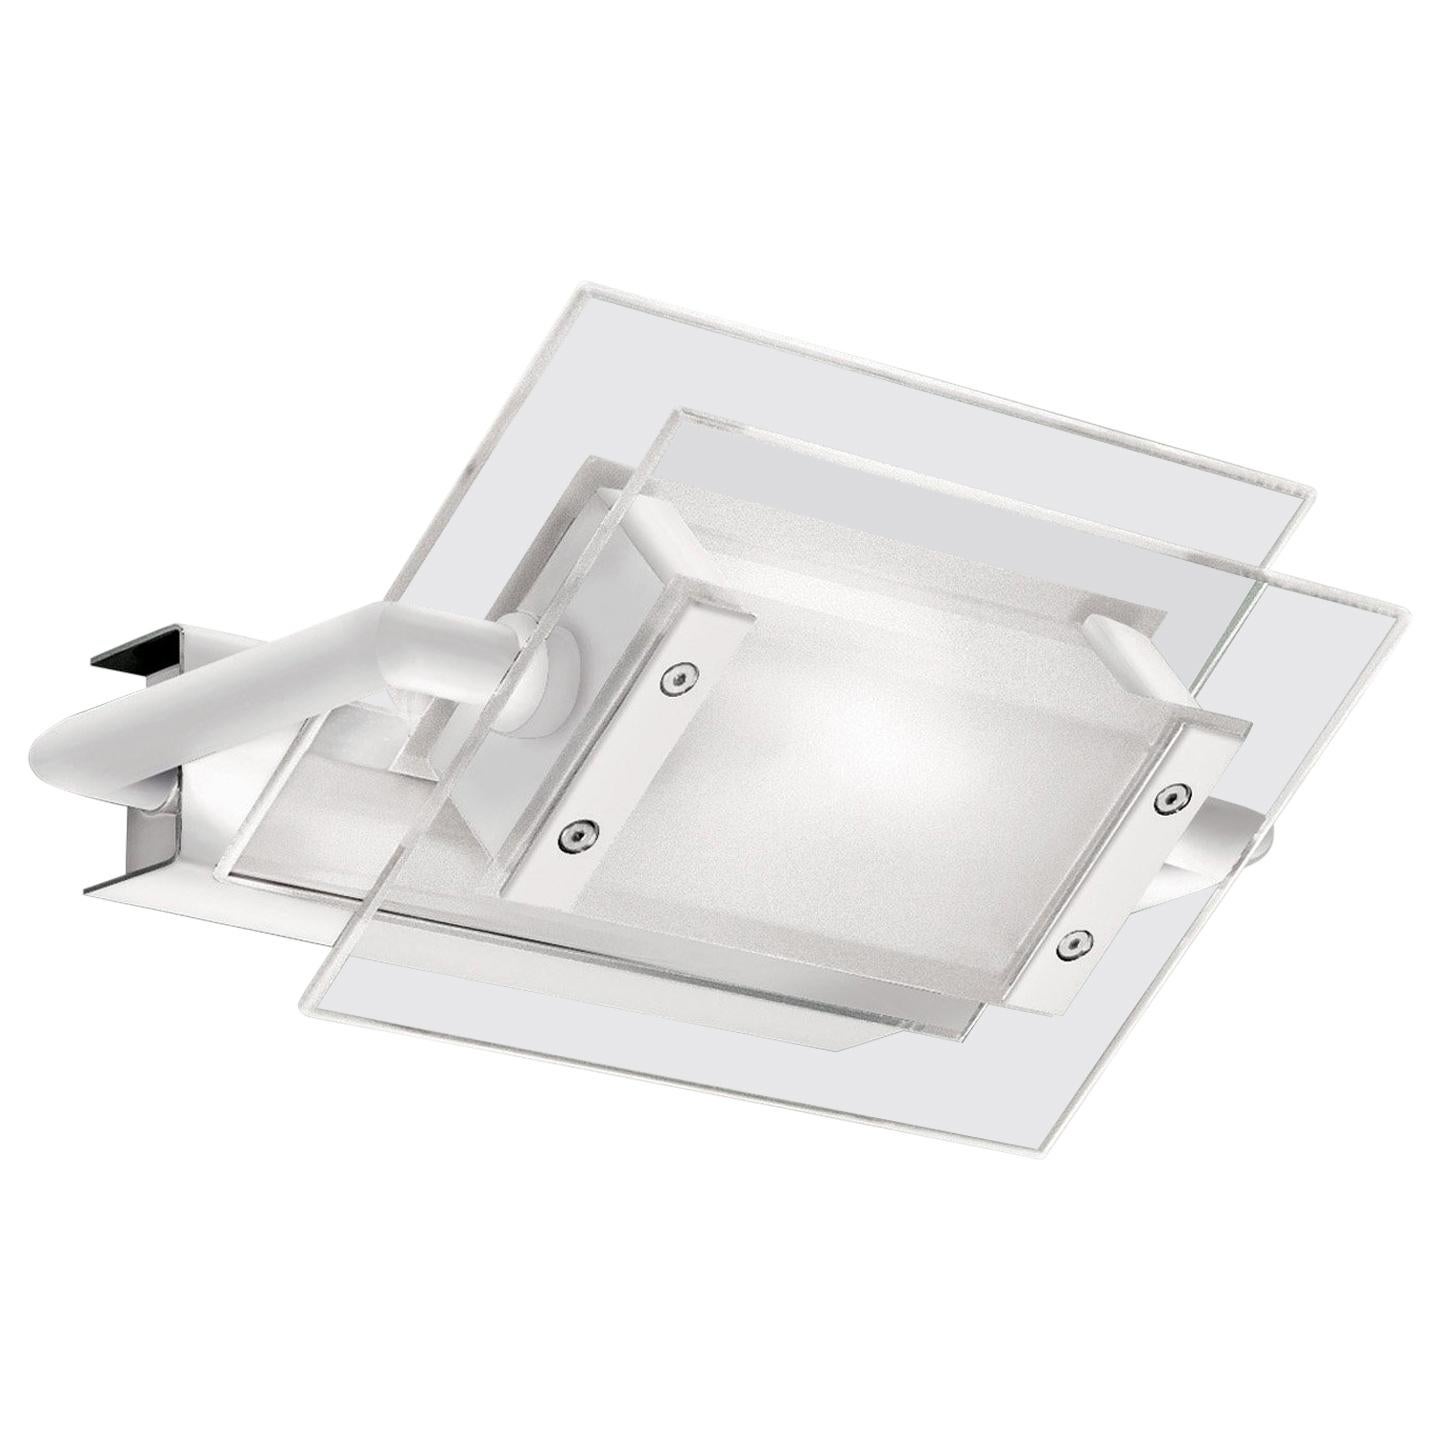 Leucos 360° P-PL 120 Wall Light in Satin, Transparent and White by Design Lab